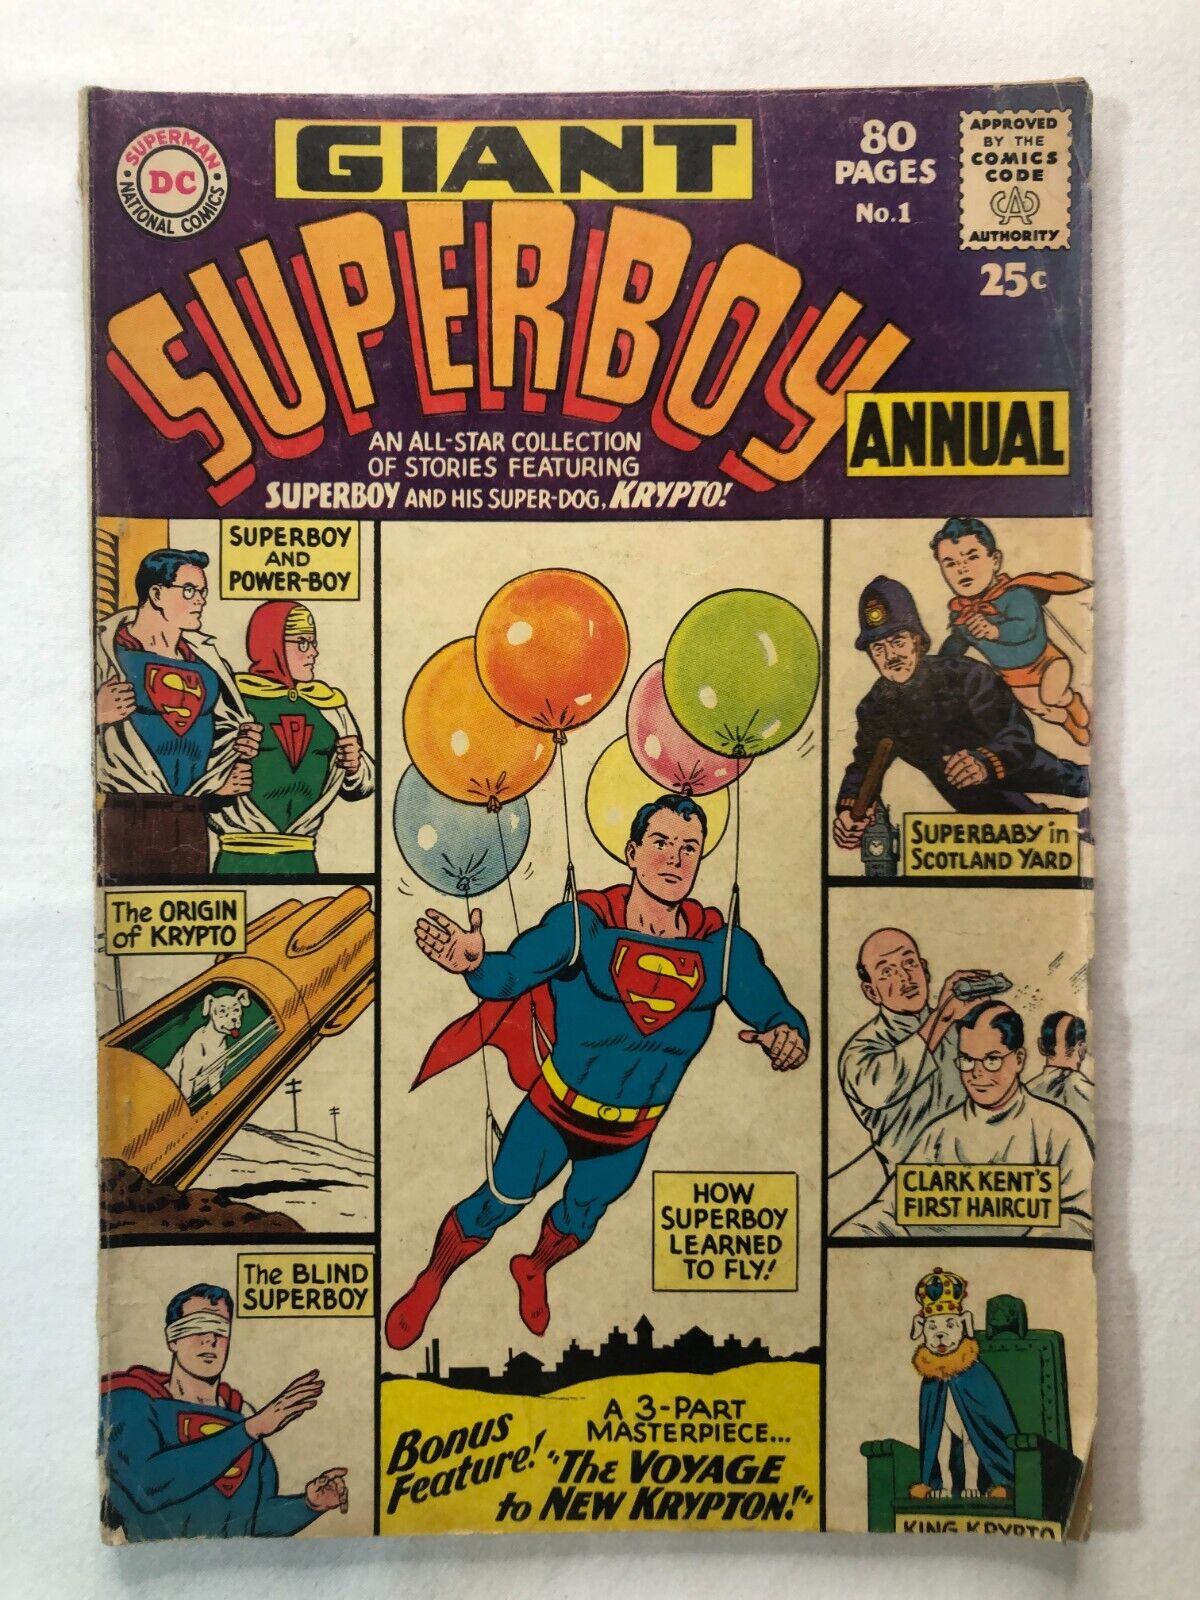 Superboy Annual #1 June 1964 Key Issue Vintage DC Comics Silver Age Collectable